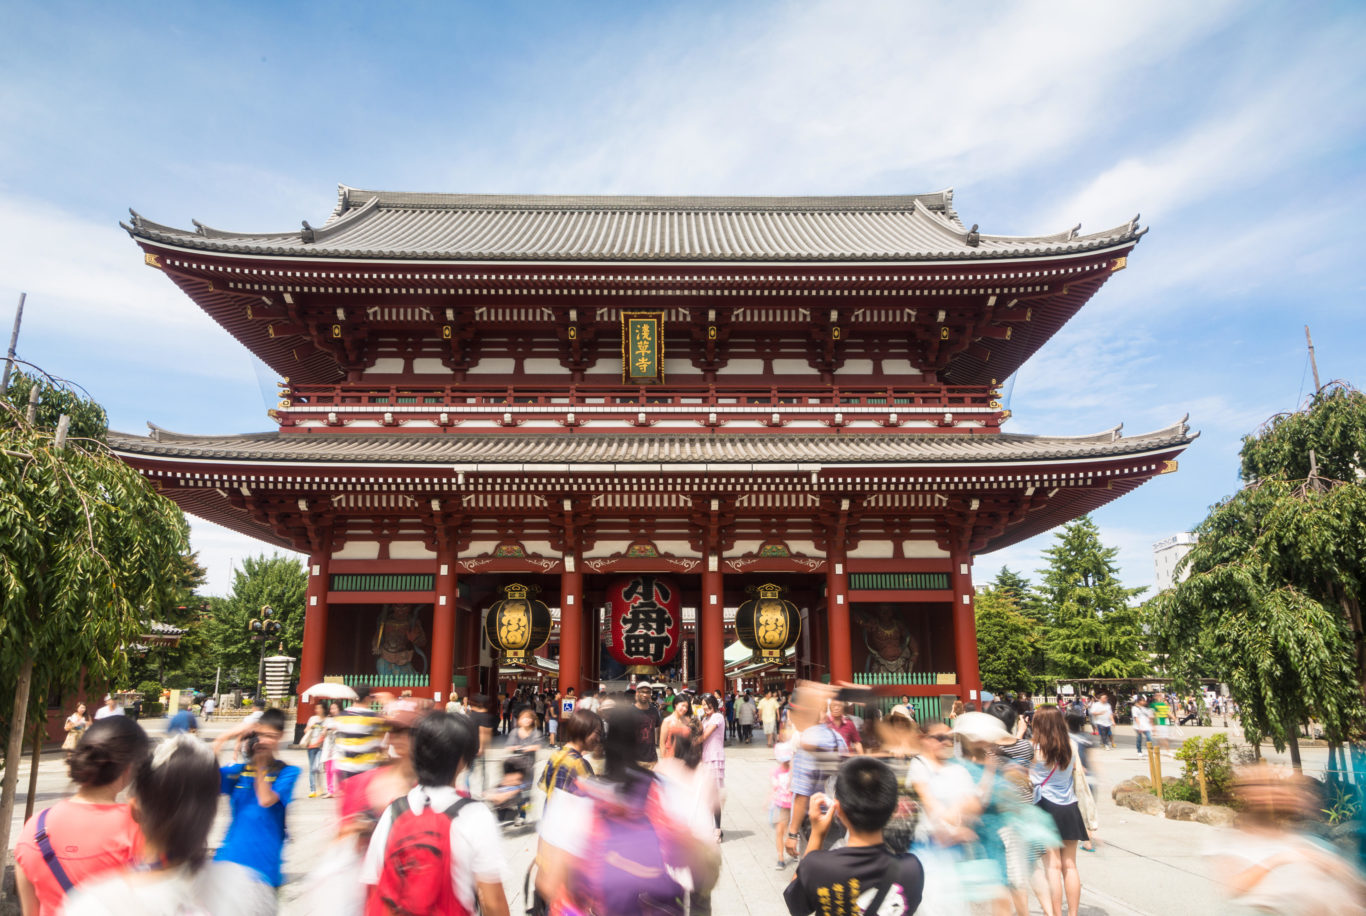 Senso-ji buddhist temple in tokyo an example of buddhism in east asia